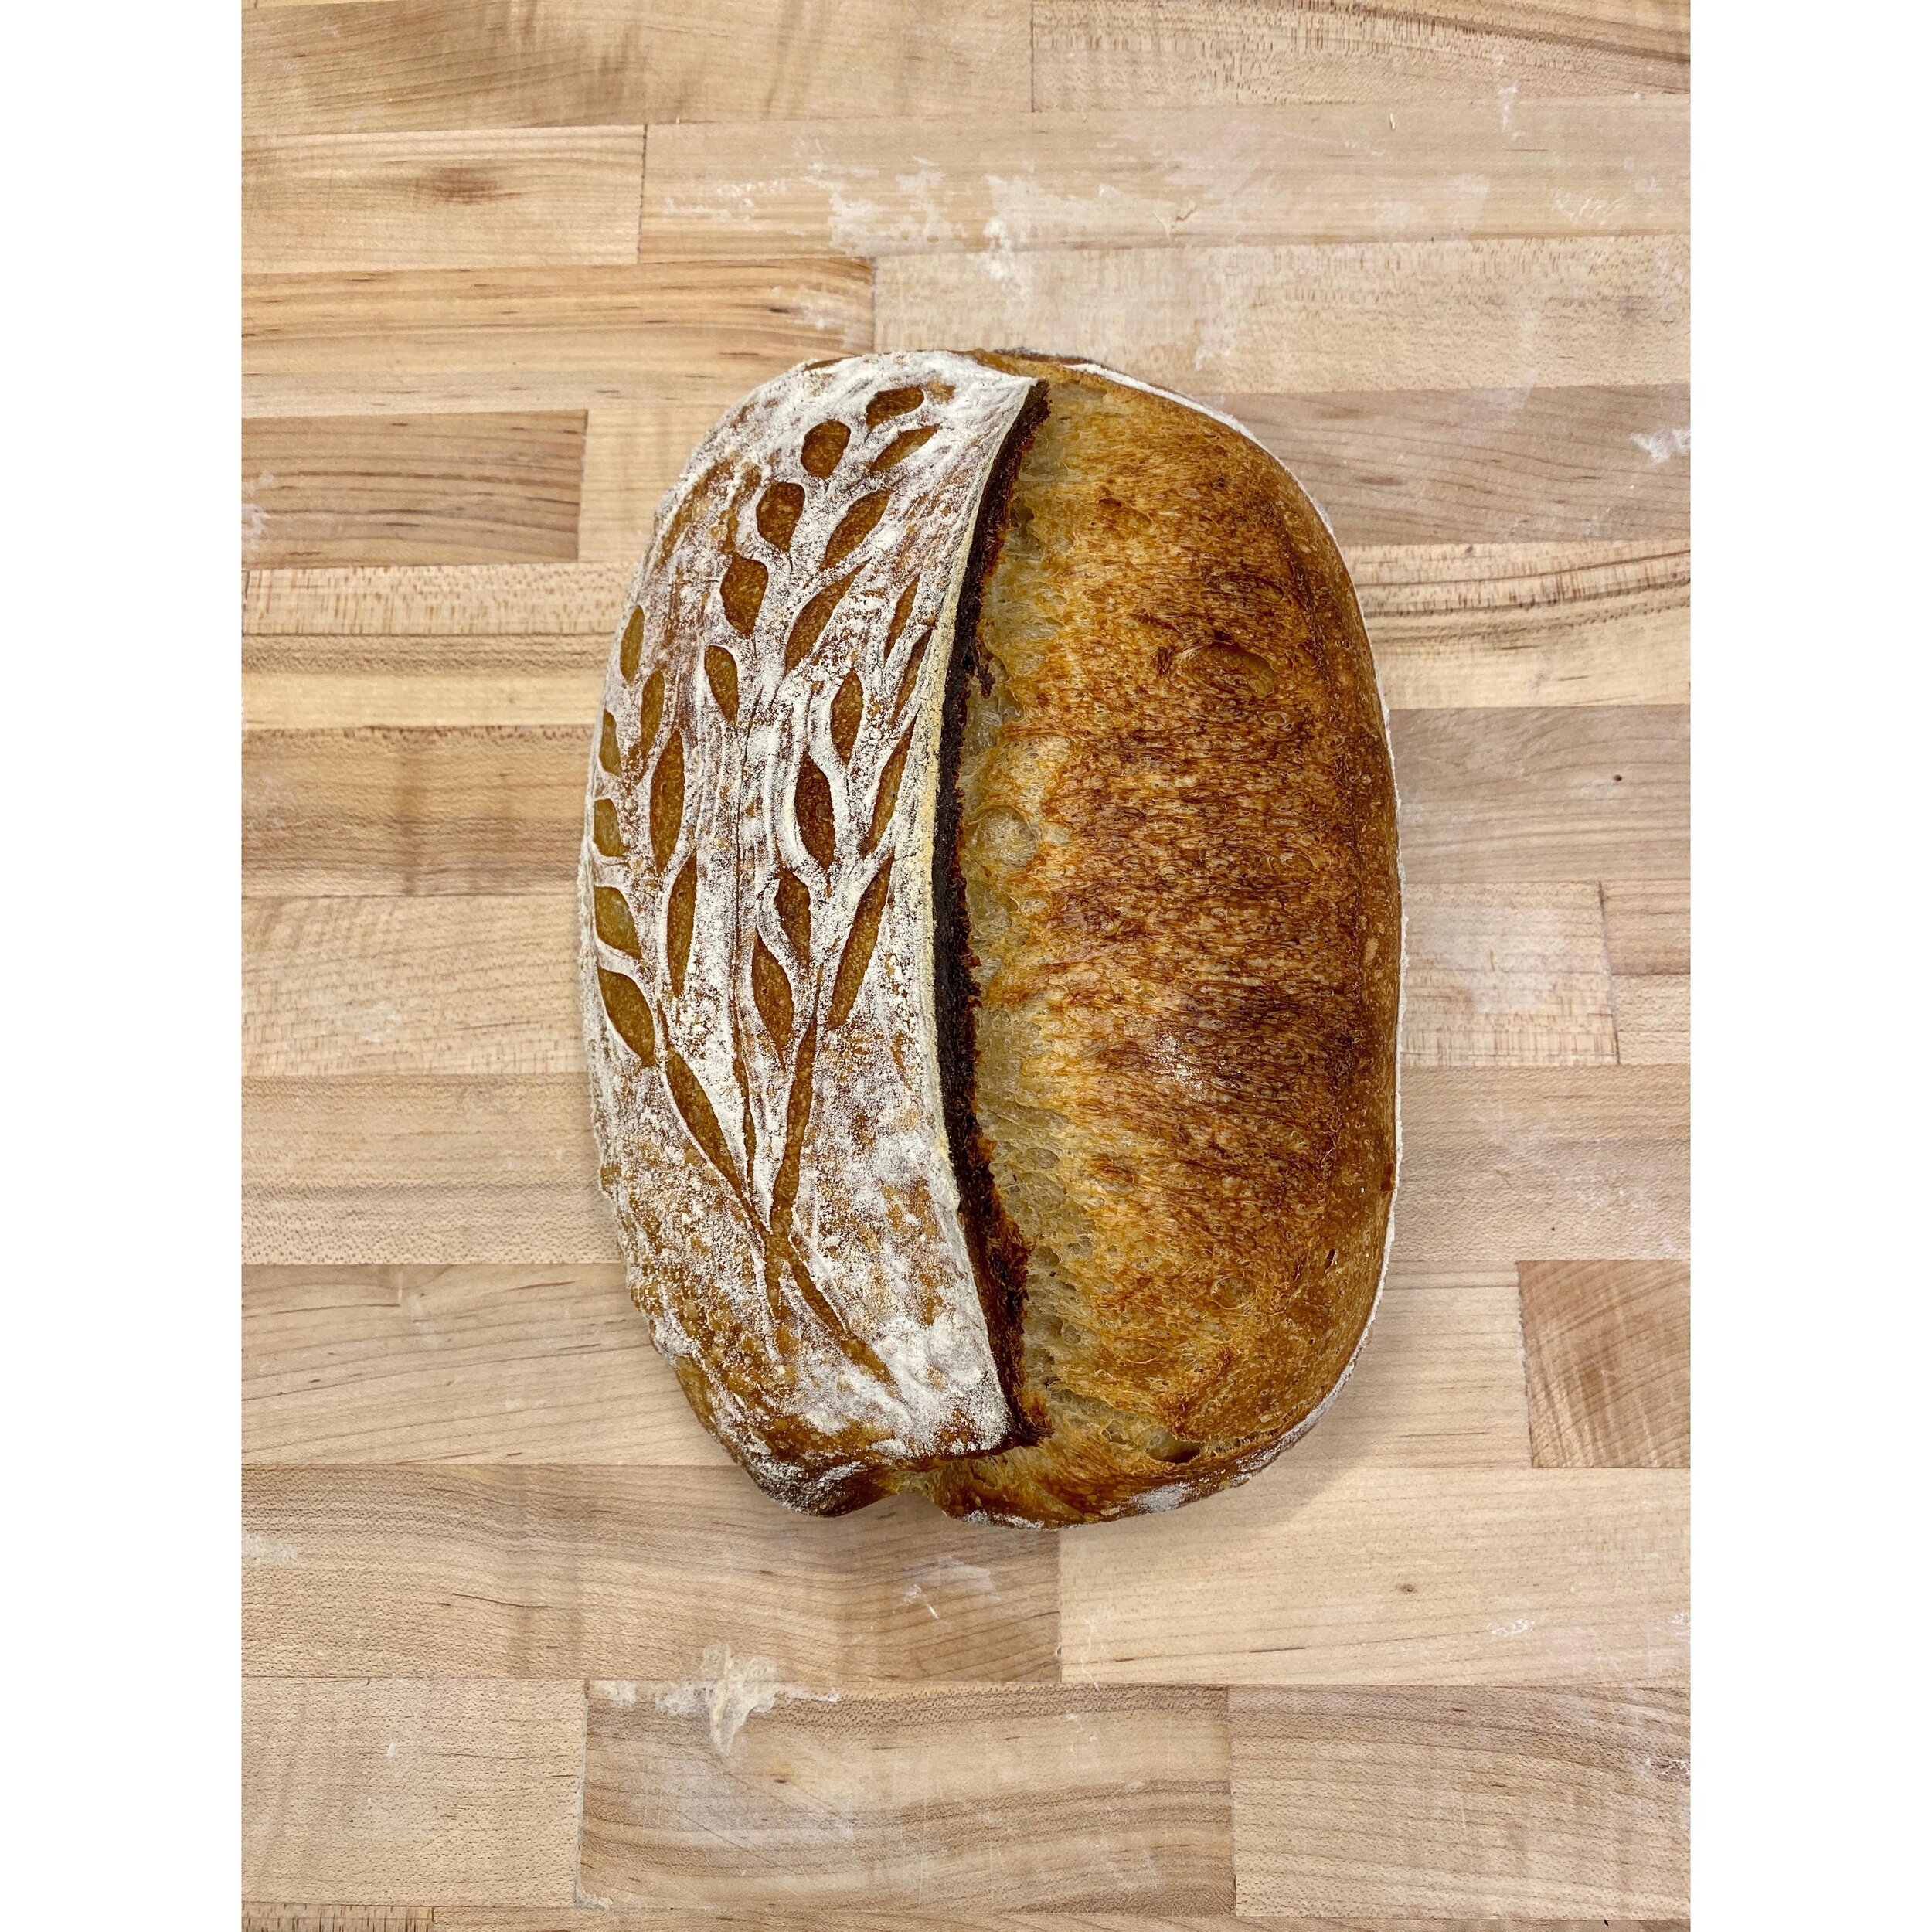 Only one bake day on Tuesday 2/20 this week, then we will be back on 2/28. Stock up with Purple Straw Country loaves, Olive &amp; Herb loaves, and Rouge de Bordeaux Baguettes